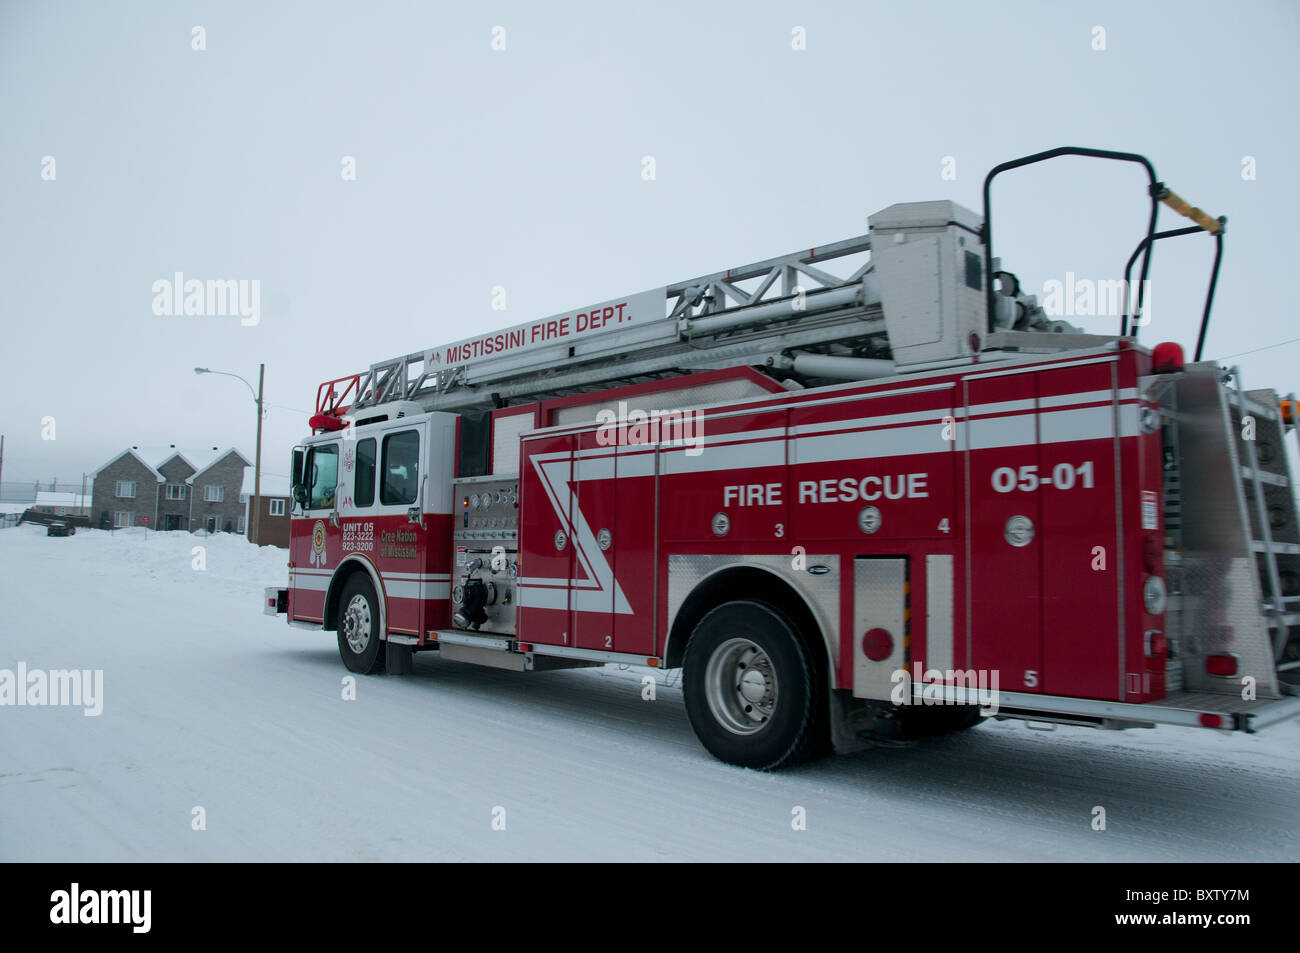 Fire rescue Truck Indigenous Cree nation town of Mistissini Northern Quebec Canada Stock Photo